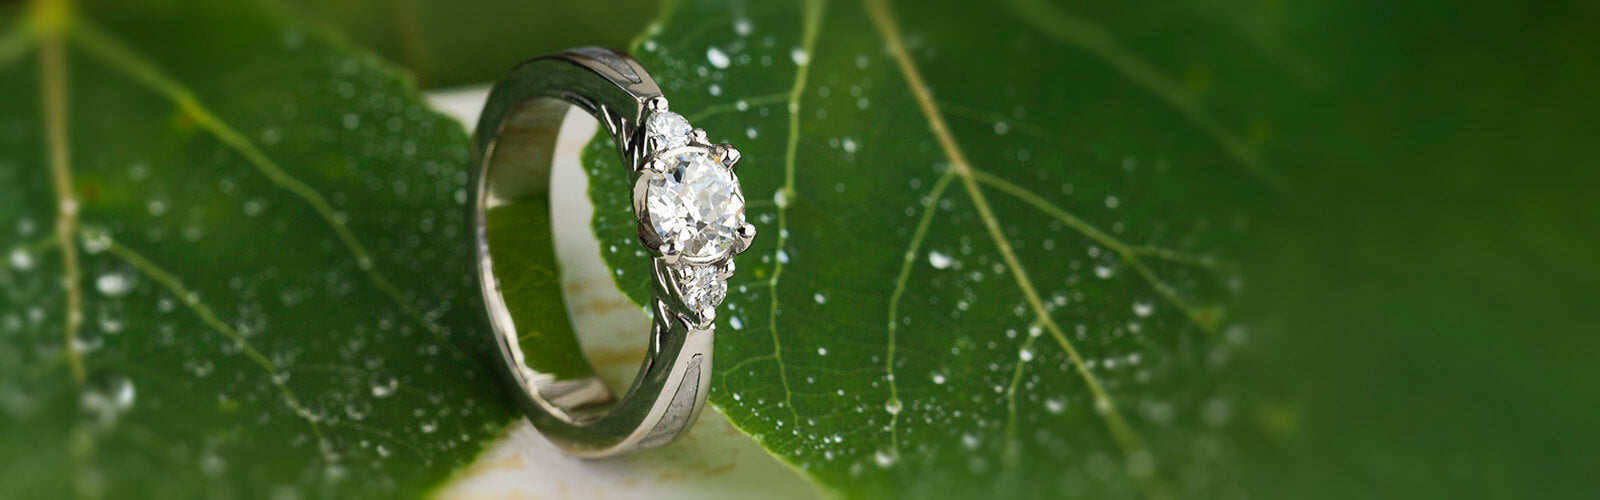 Platinum Engagement Rings, Jewelry by Johan